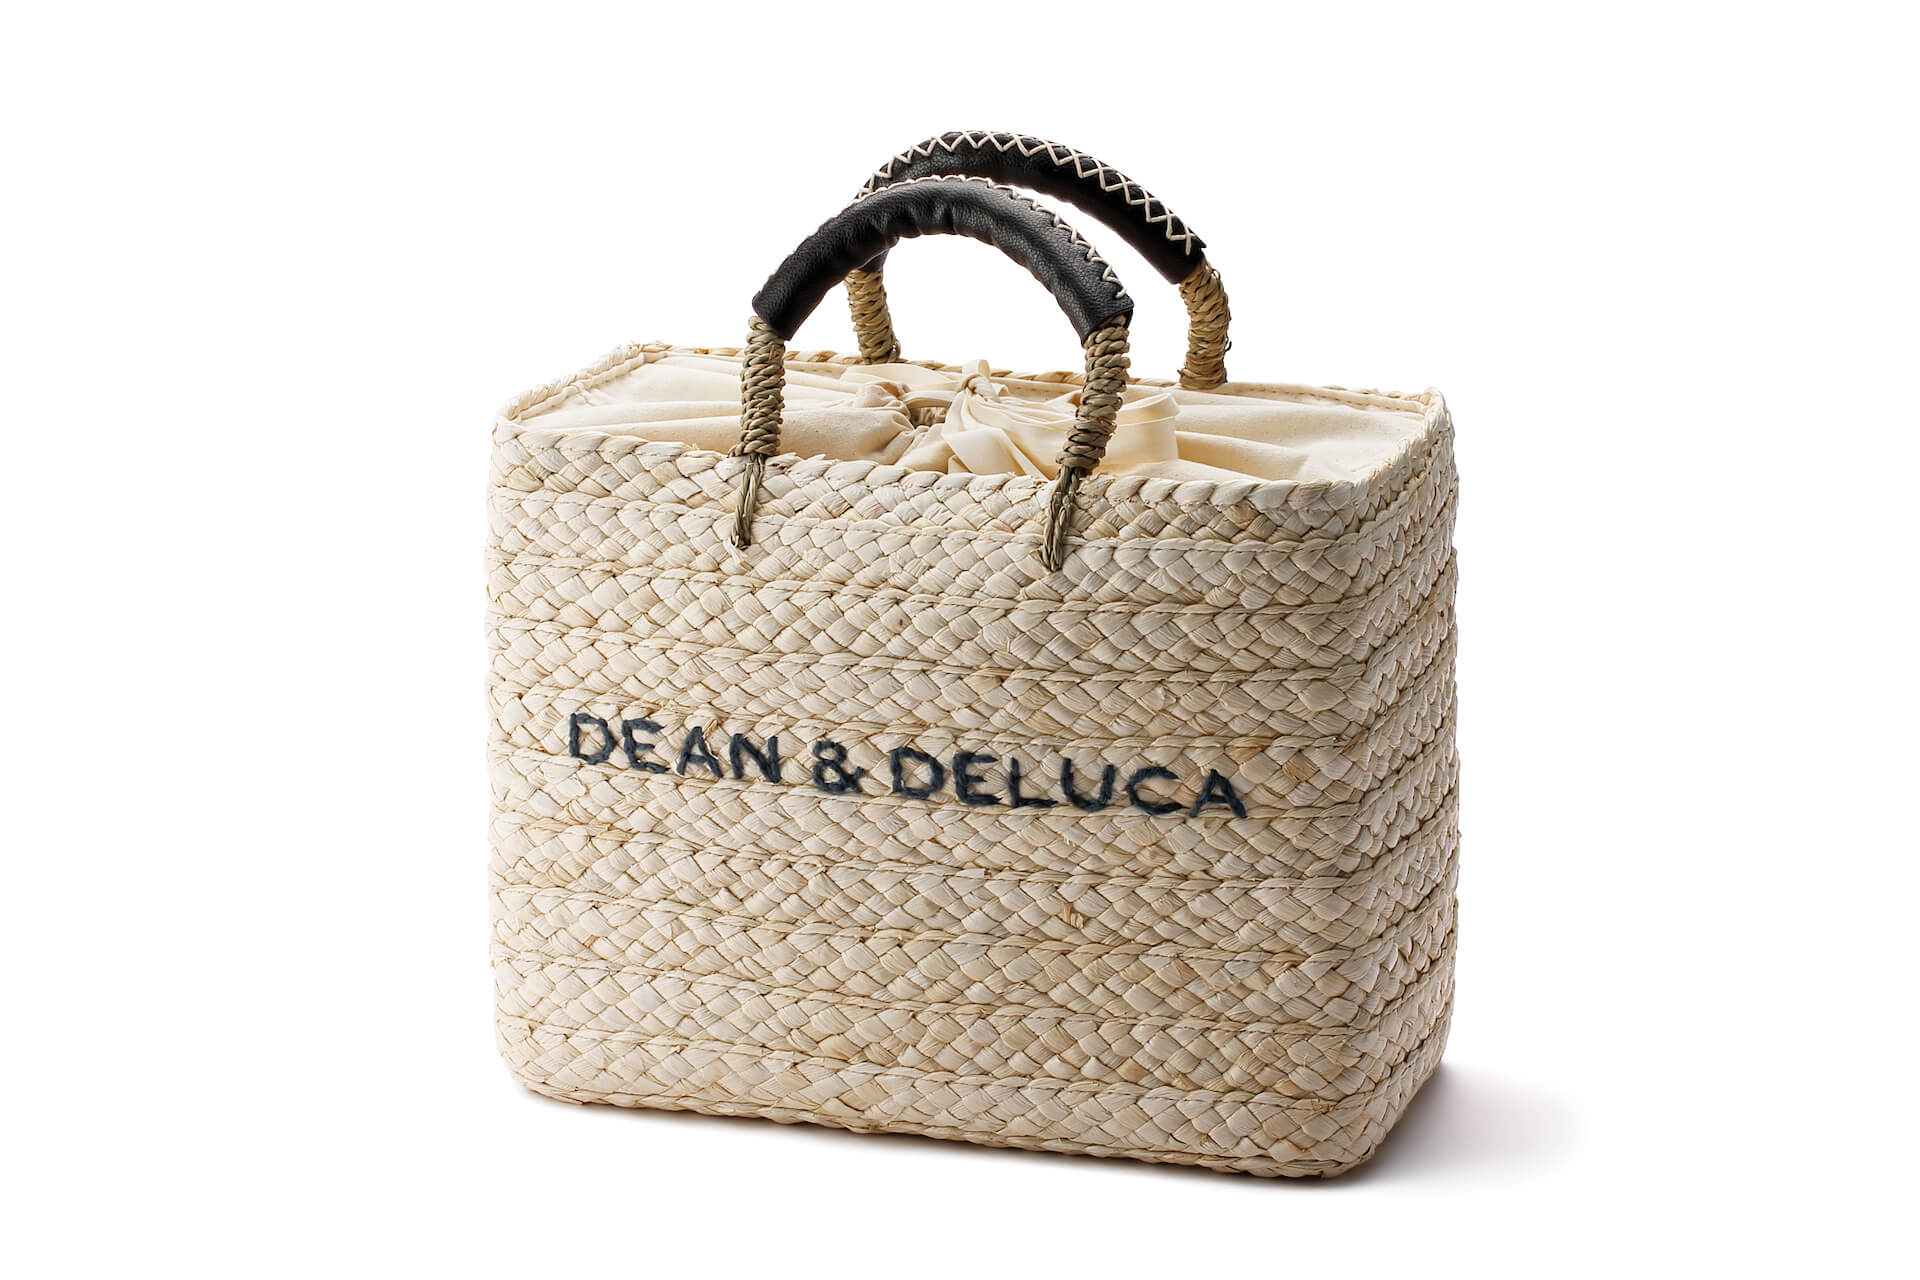 DEAN ＆ DELUCAとBEAMS COUTUREが初コラボ！母の日ギフトに最適なエプロンやカゴバッグなどが登場 life_220405_deananddeluca_beams_05